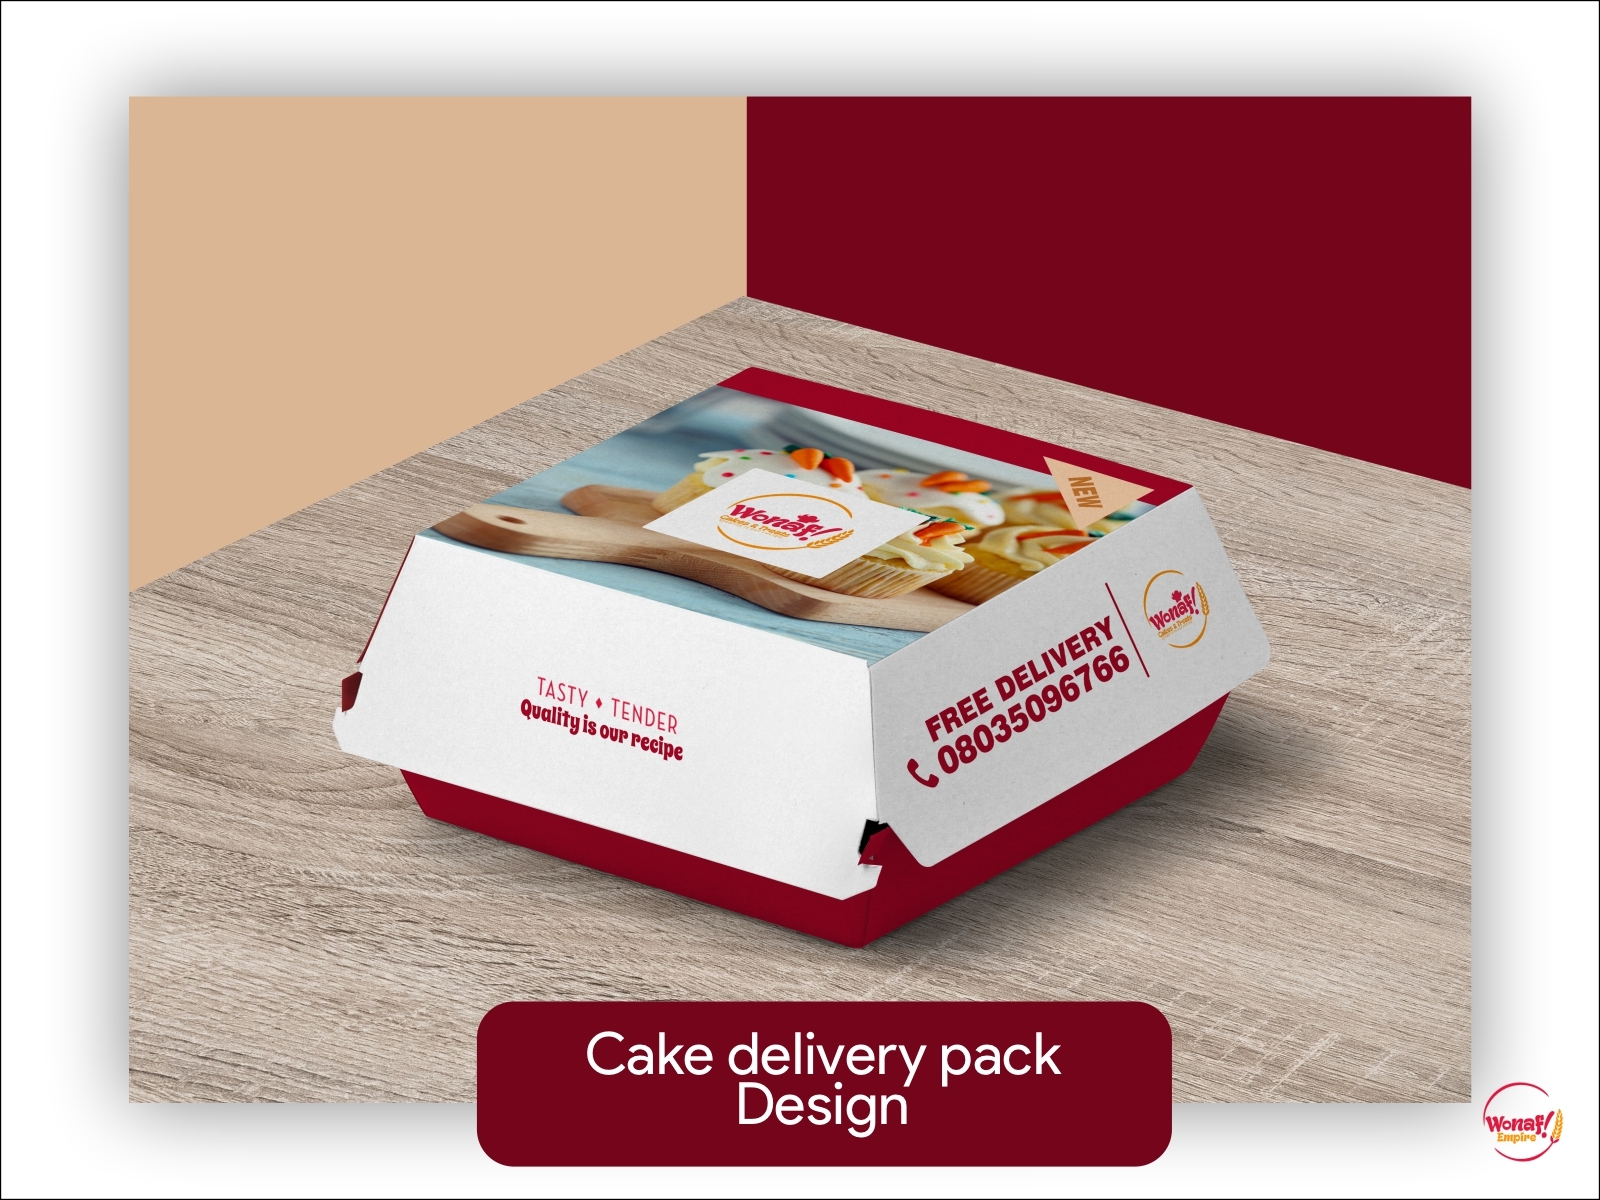 Cake Delivery Pack Design by CHIEHIURA BASIL on Dribbble